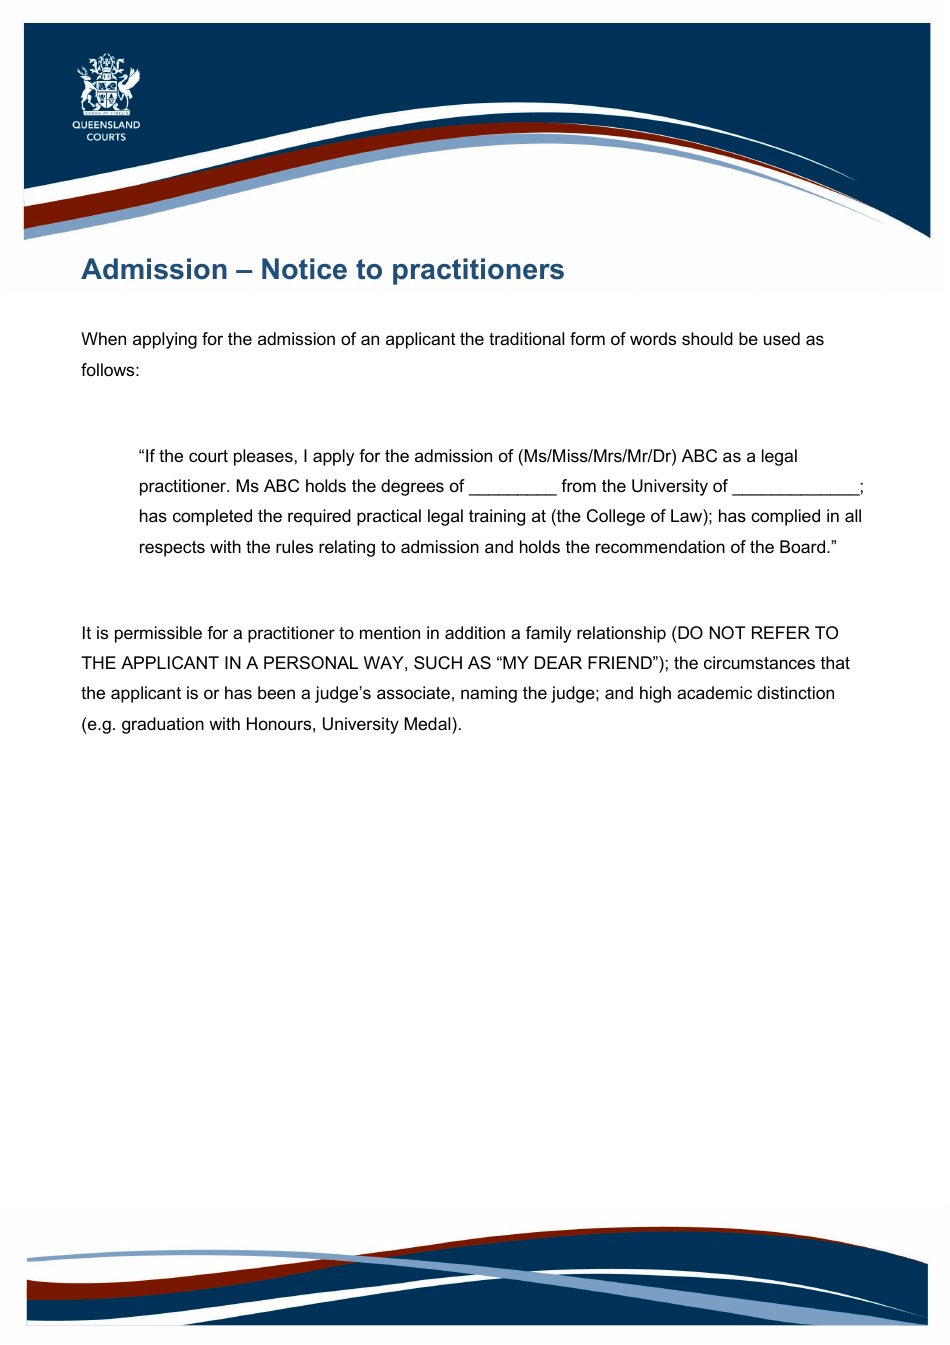 Admission - Notice to Practitioners - Queensland, Australia, Page 1